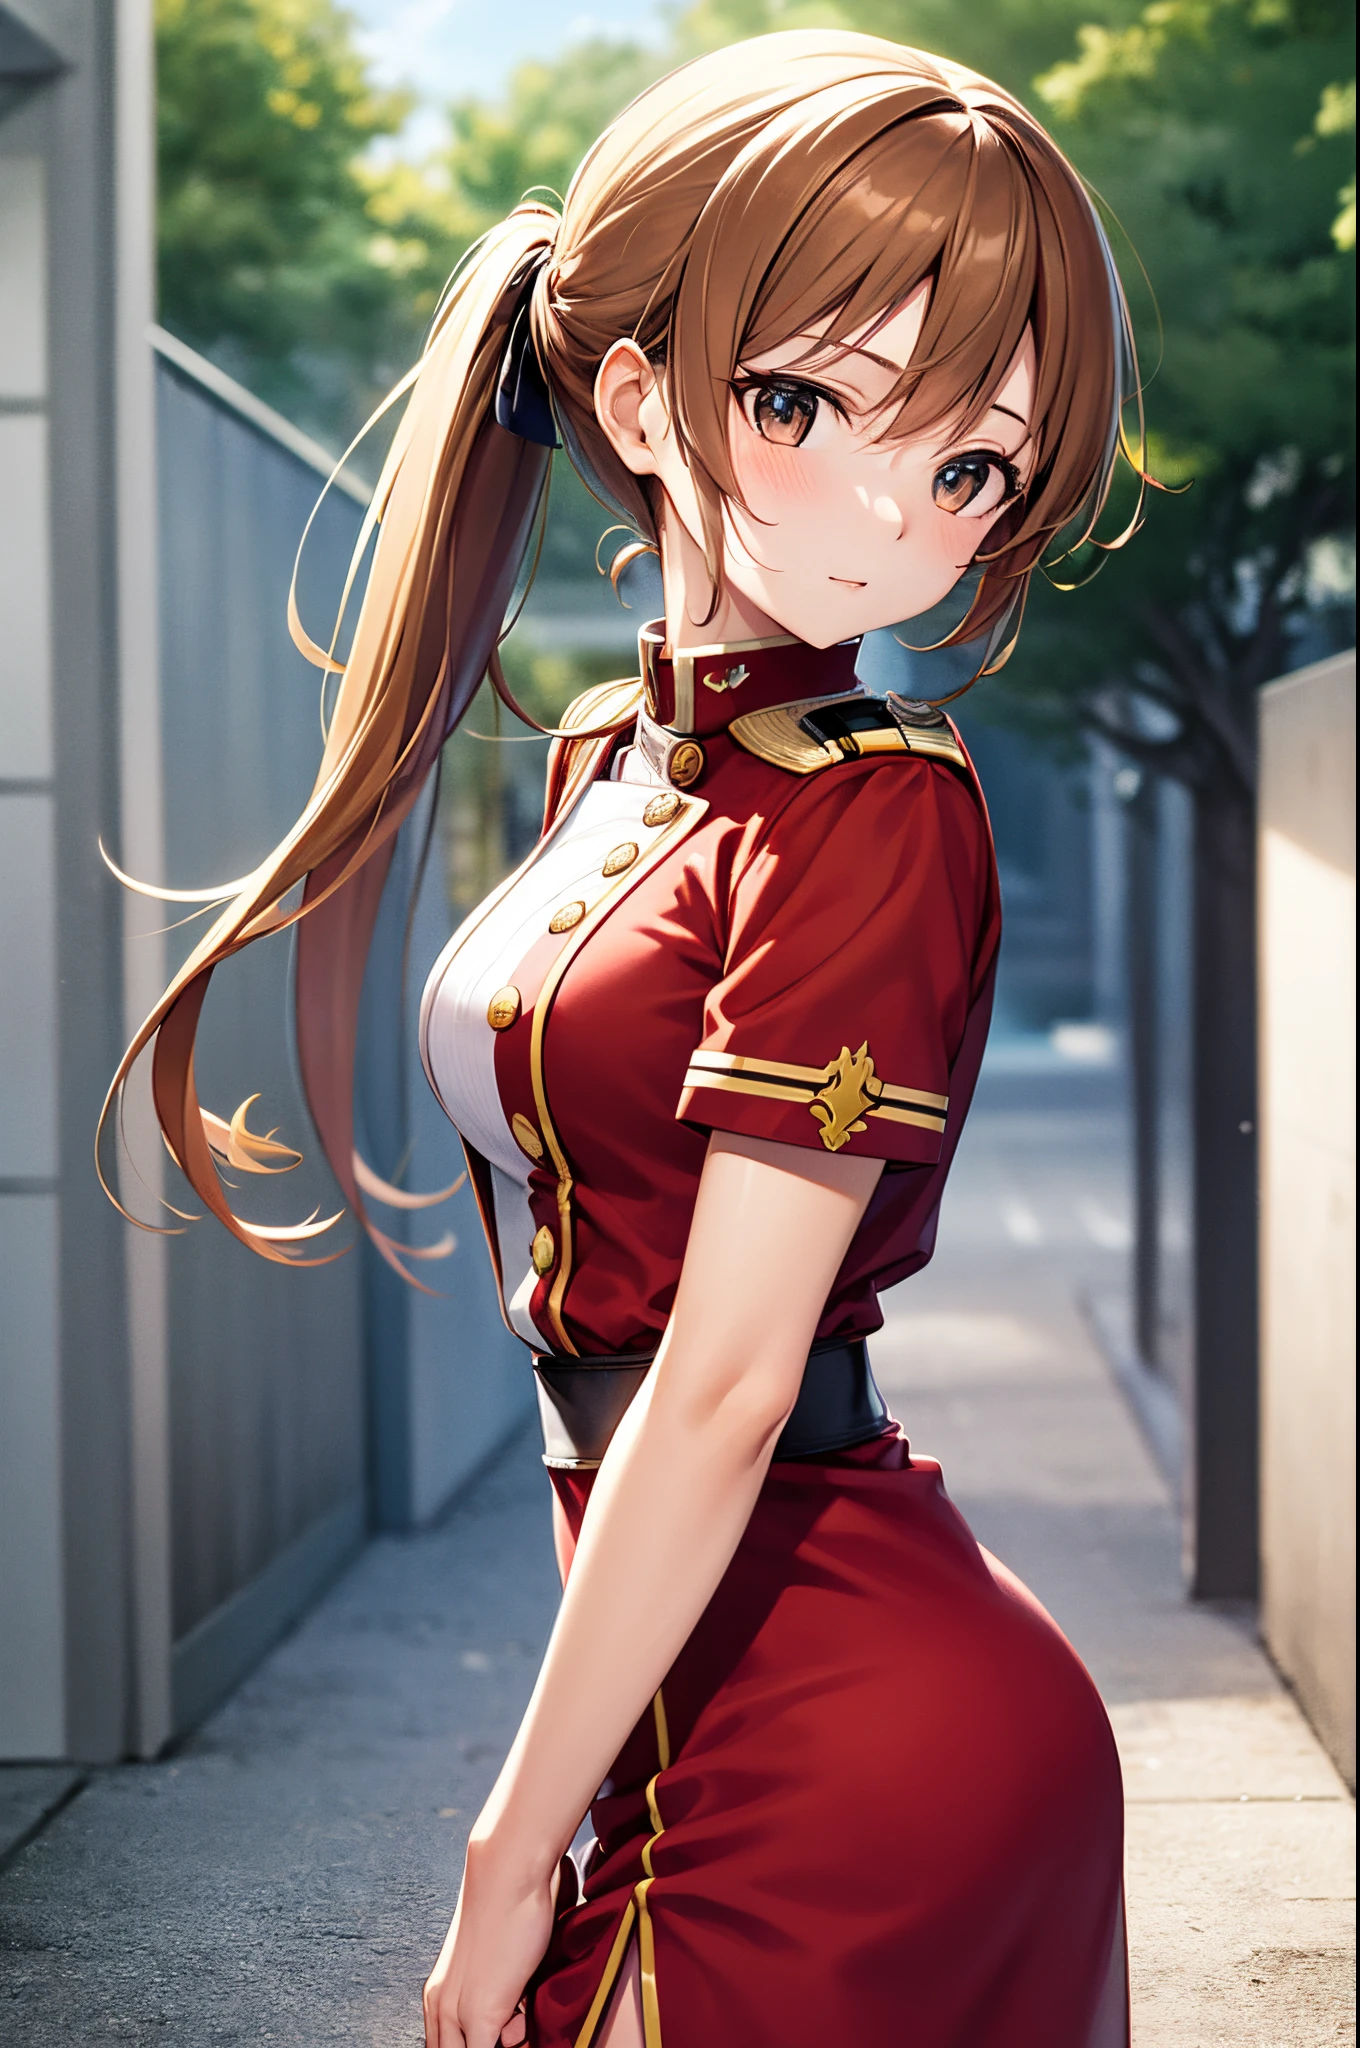 hight resolution, top-quality, ultra-quality、​masterpiece、anime-style picture、super precision、High quality anime girl with brown hair and brown eyes,[[Attractive eyes,A detailed eye、radiant eyes, Colorful eyes:1.25]]、the whole、front-facing view、Short ponytail, Brown hair、Solo Girl,red and white uniform、Dress correctly、best pictures, masutepiece, Photorealistic, Soft light, Attractive eyes that make you feel sucked in、Cowboy Shot、Kawaii Girl